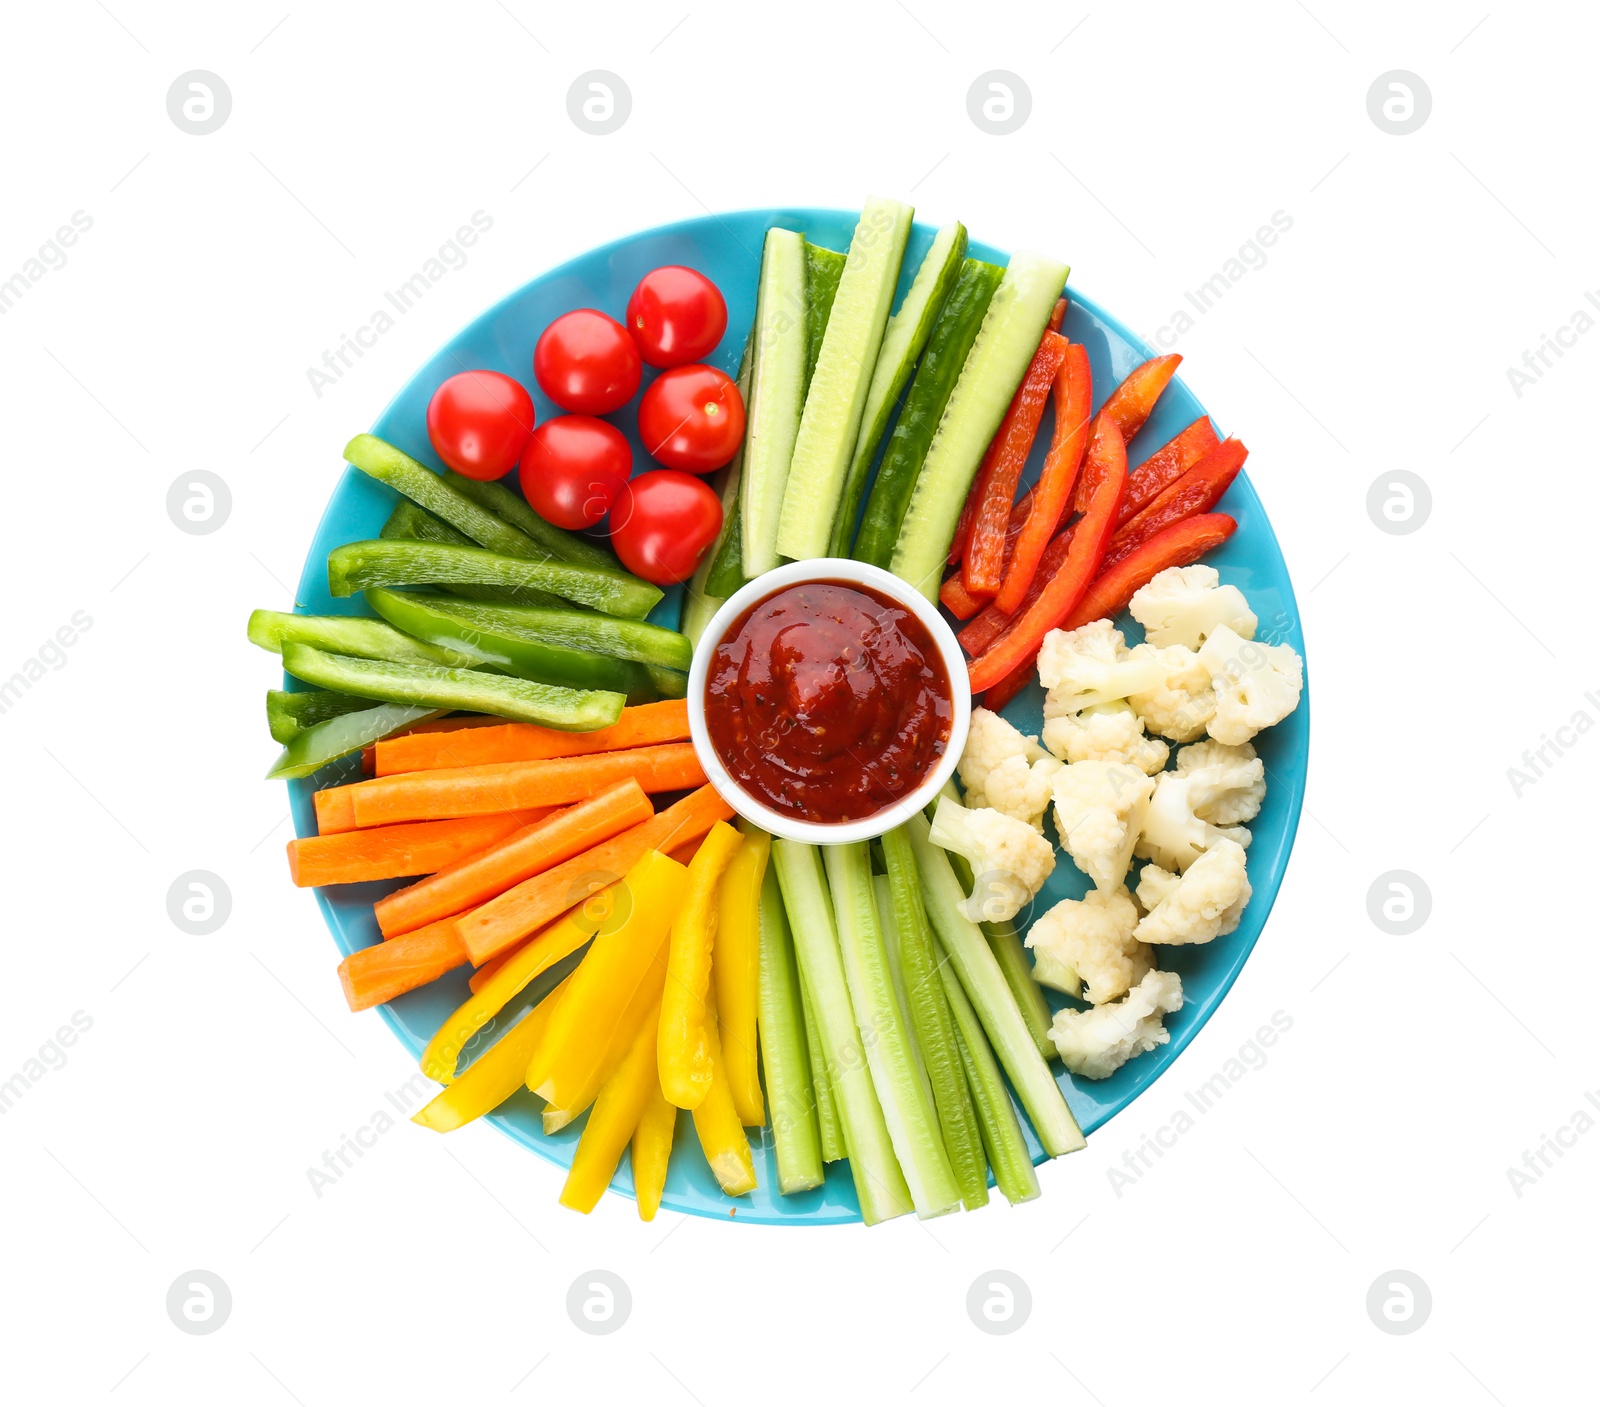 Photo of Plate with celery sticks, other vegetables and dip sauce isolated on white, top view